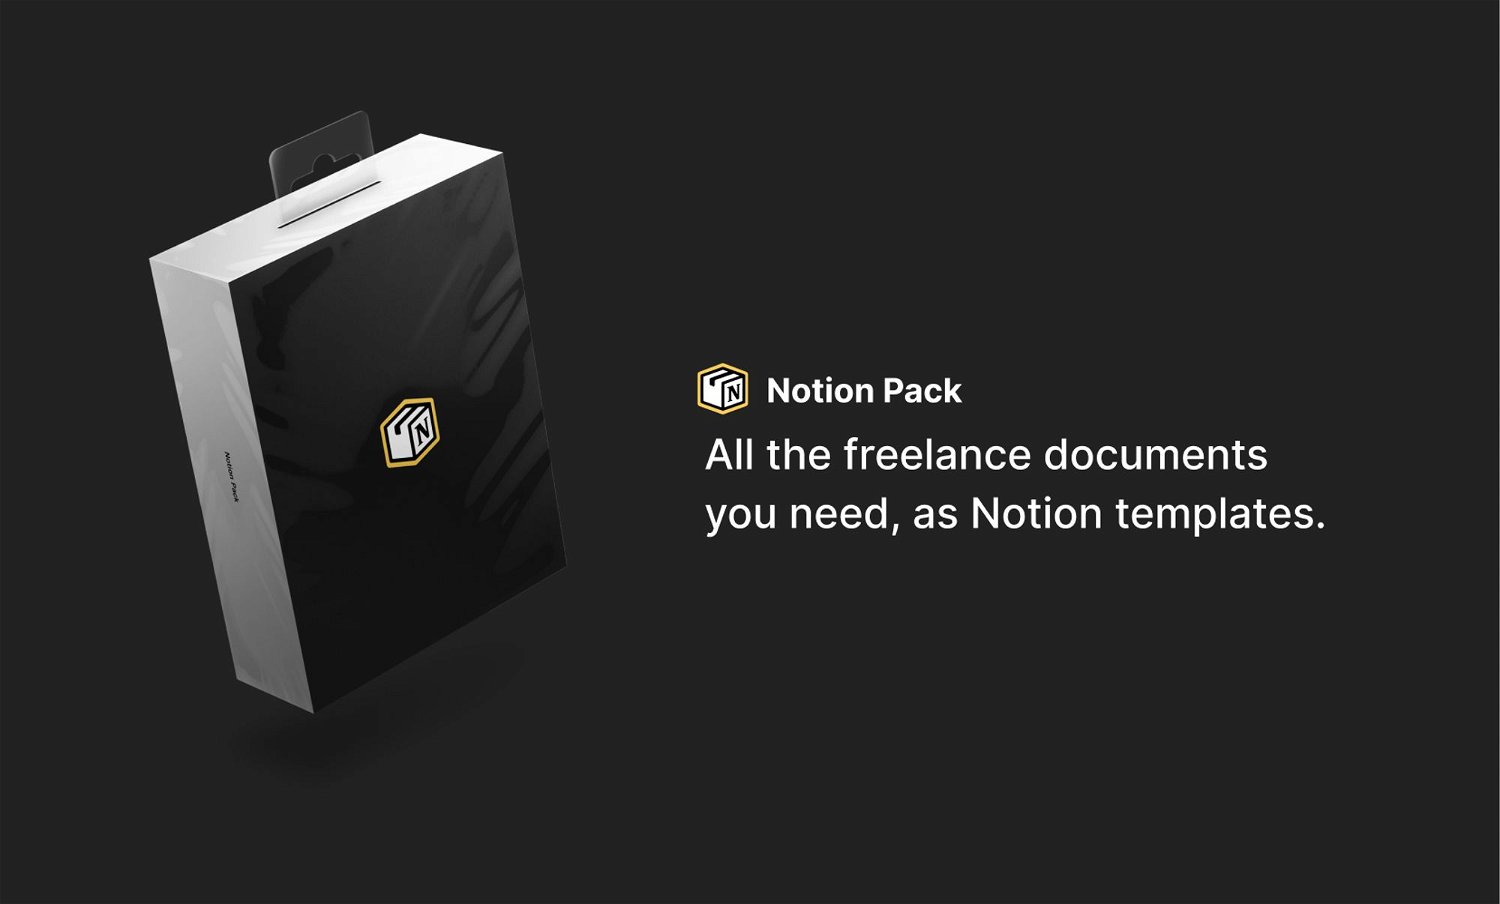 Notion Pack: all the freelance documents you need, as Notion templates